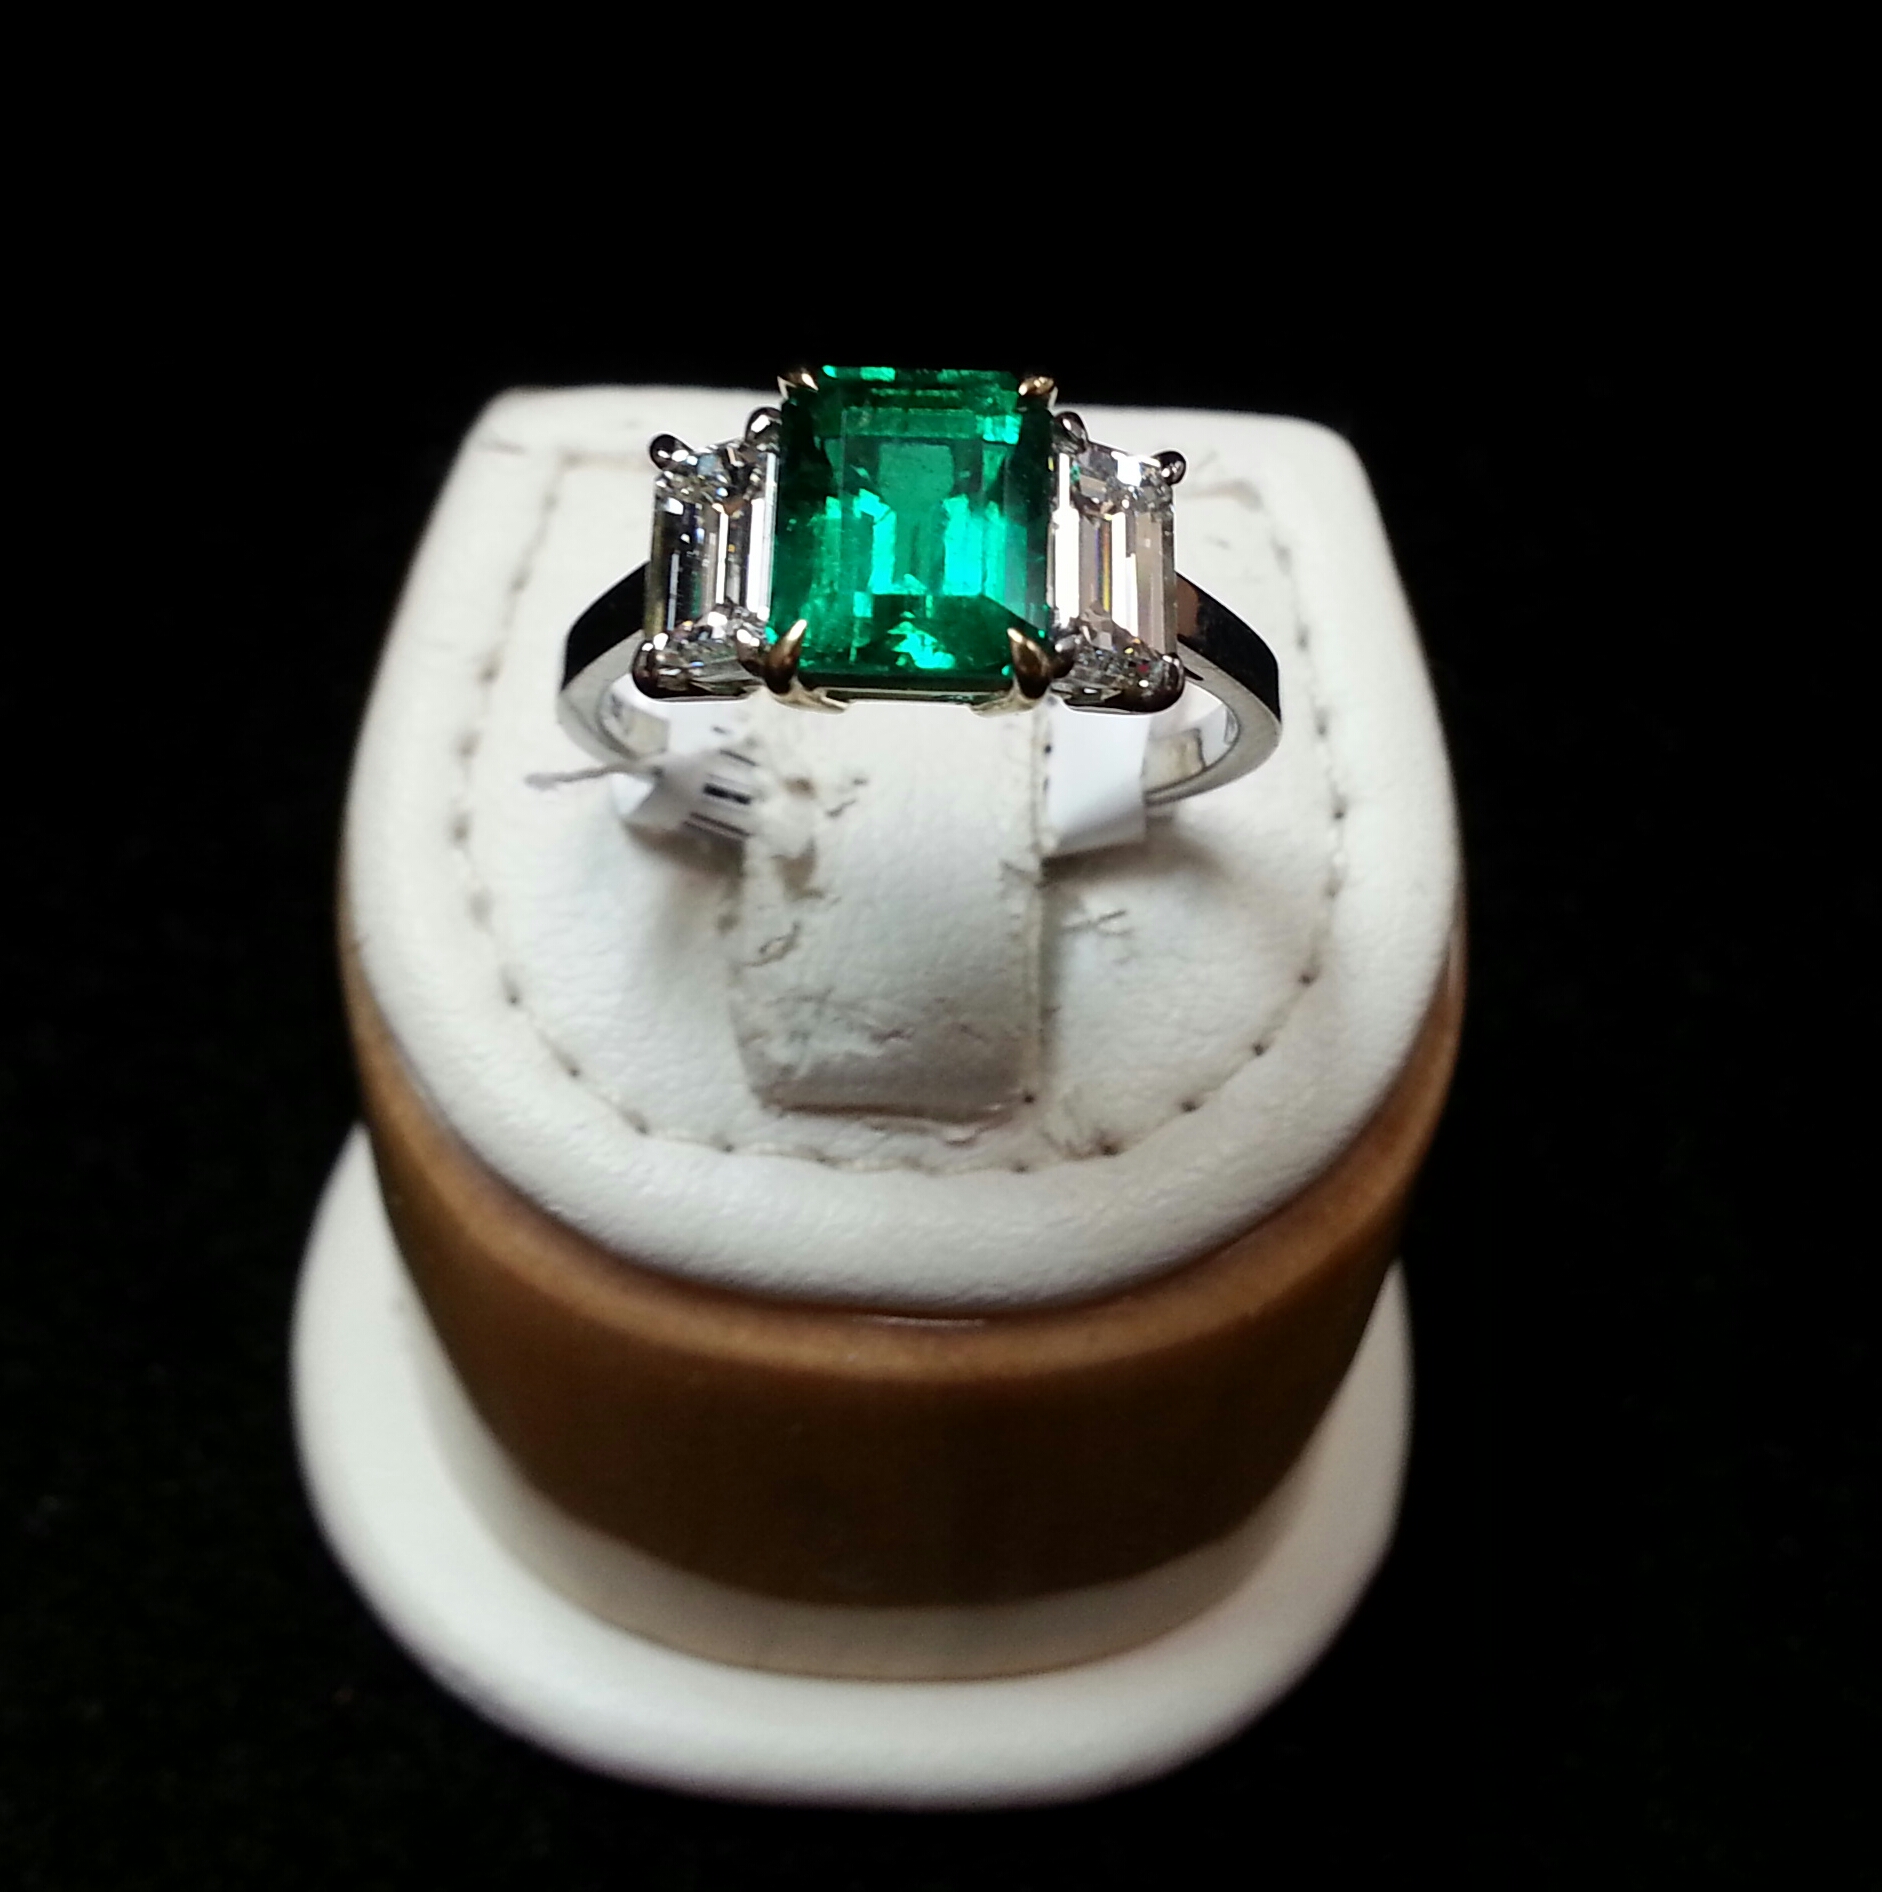 Platinum & 18k Yellow Gold Handmade Ring With an Emerald Cut Emerald & Emerald Cut Diamonds. Emerald is 1.64ct and Diamonds are 1.05ctw F/VS1